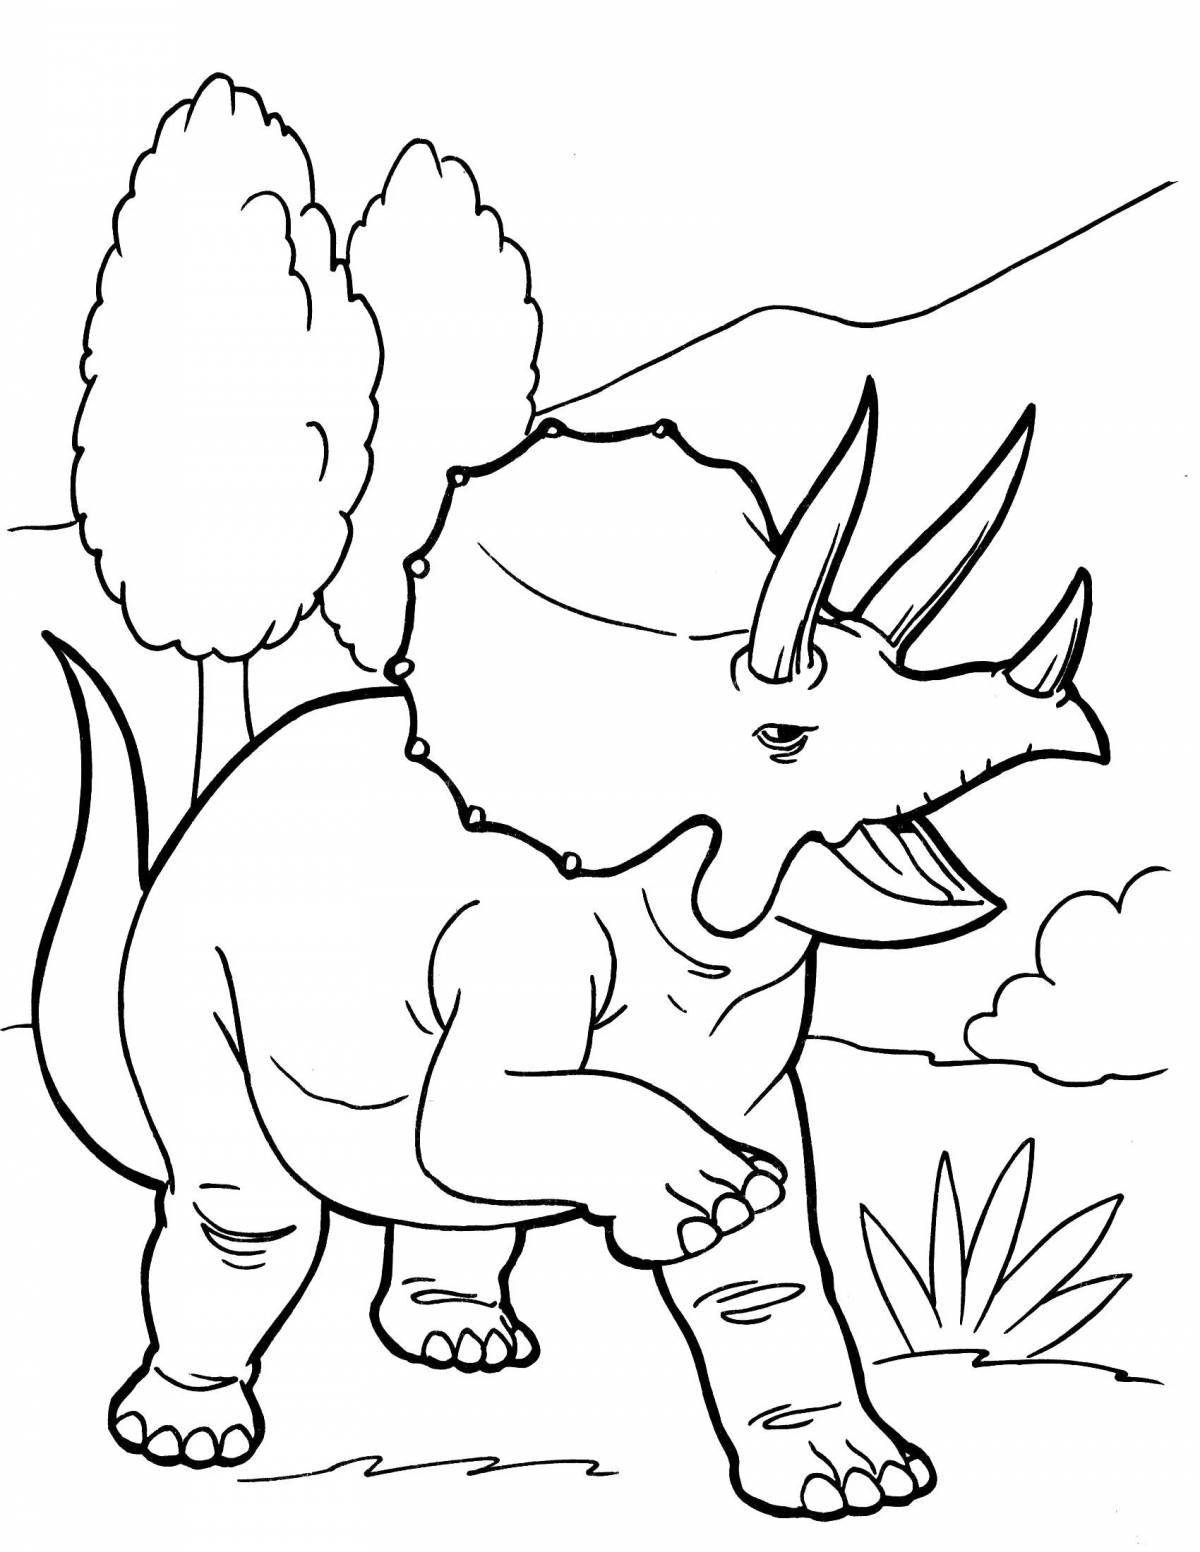 Coloring page energetic triceratops dinosaur